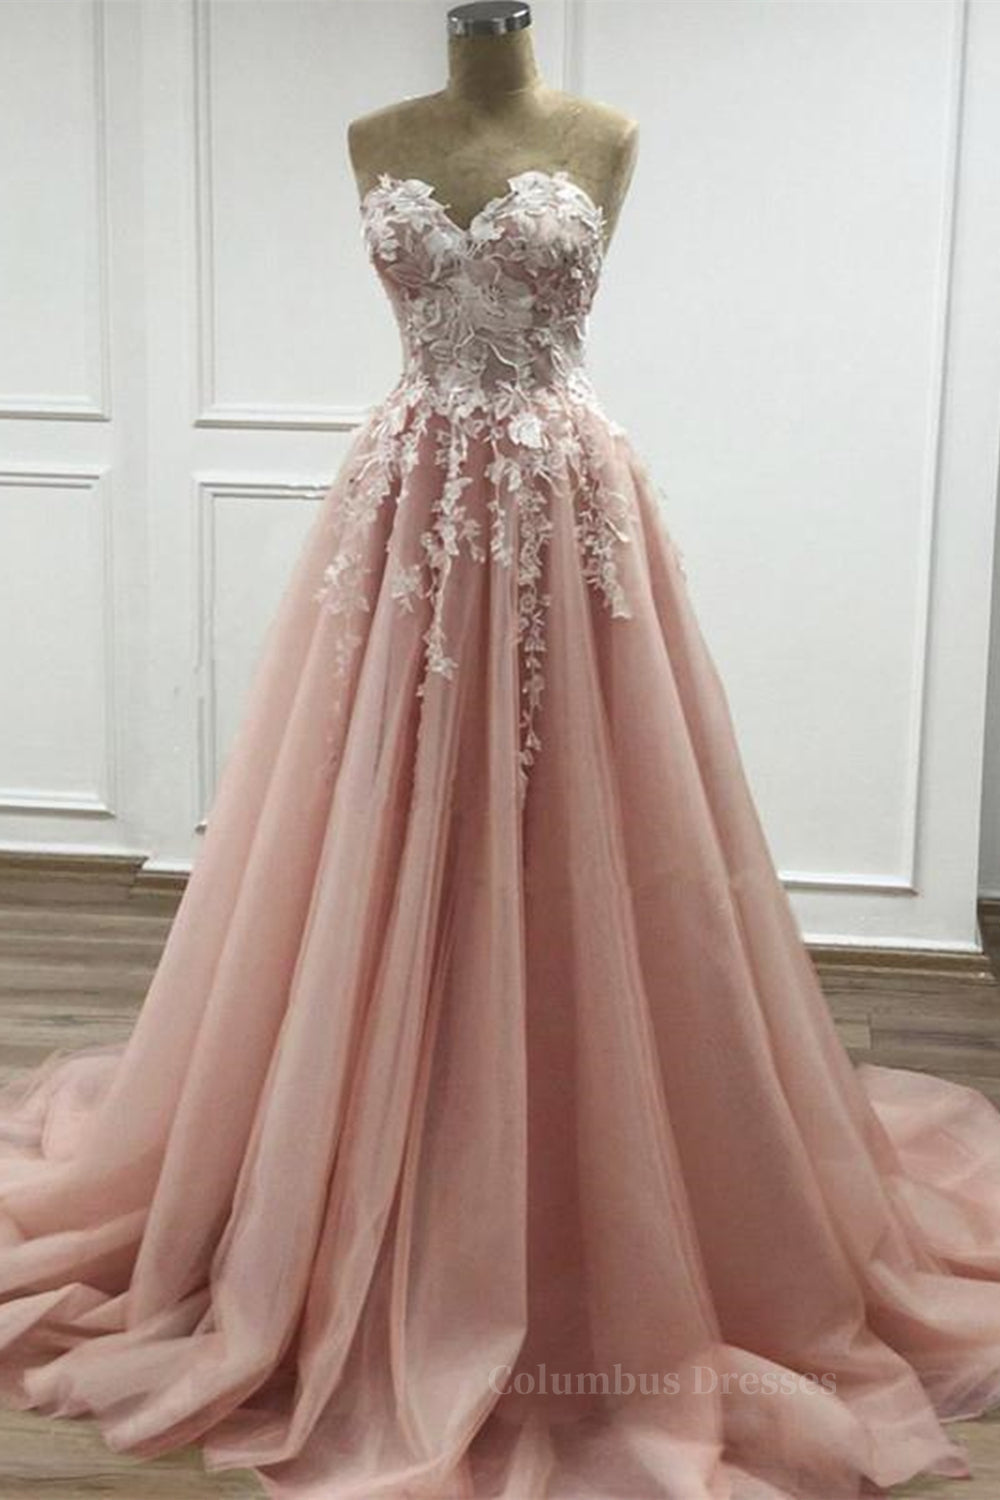 Prom Dress Light Blue, Strapless Sweetheart Neck Pink Lace Appliques Long Prom Dress, Pink Lace Floral Formal Dress, Pink Evening Dress